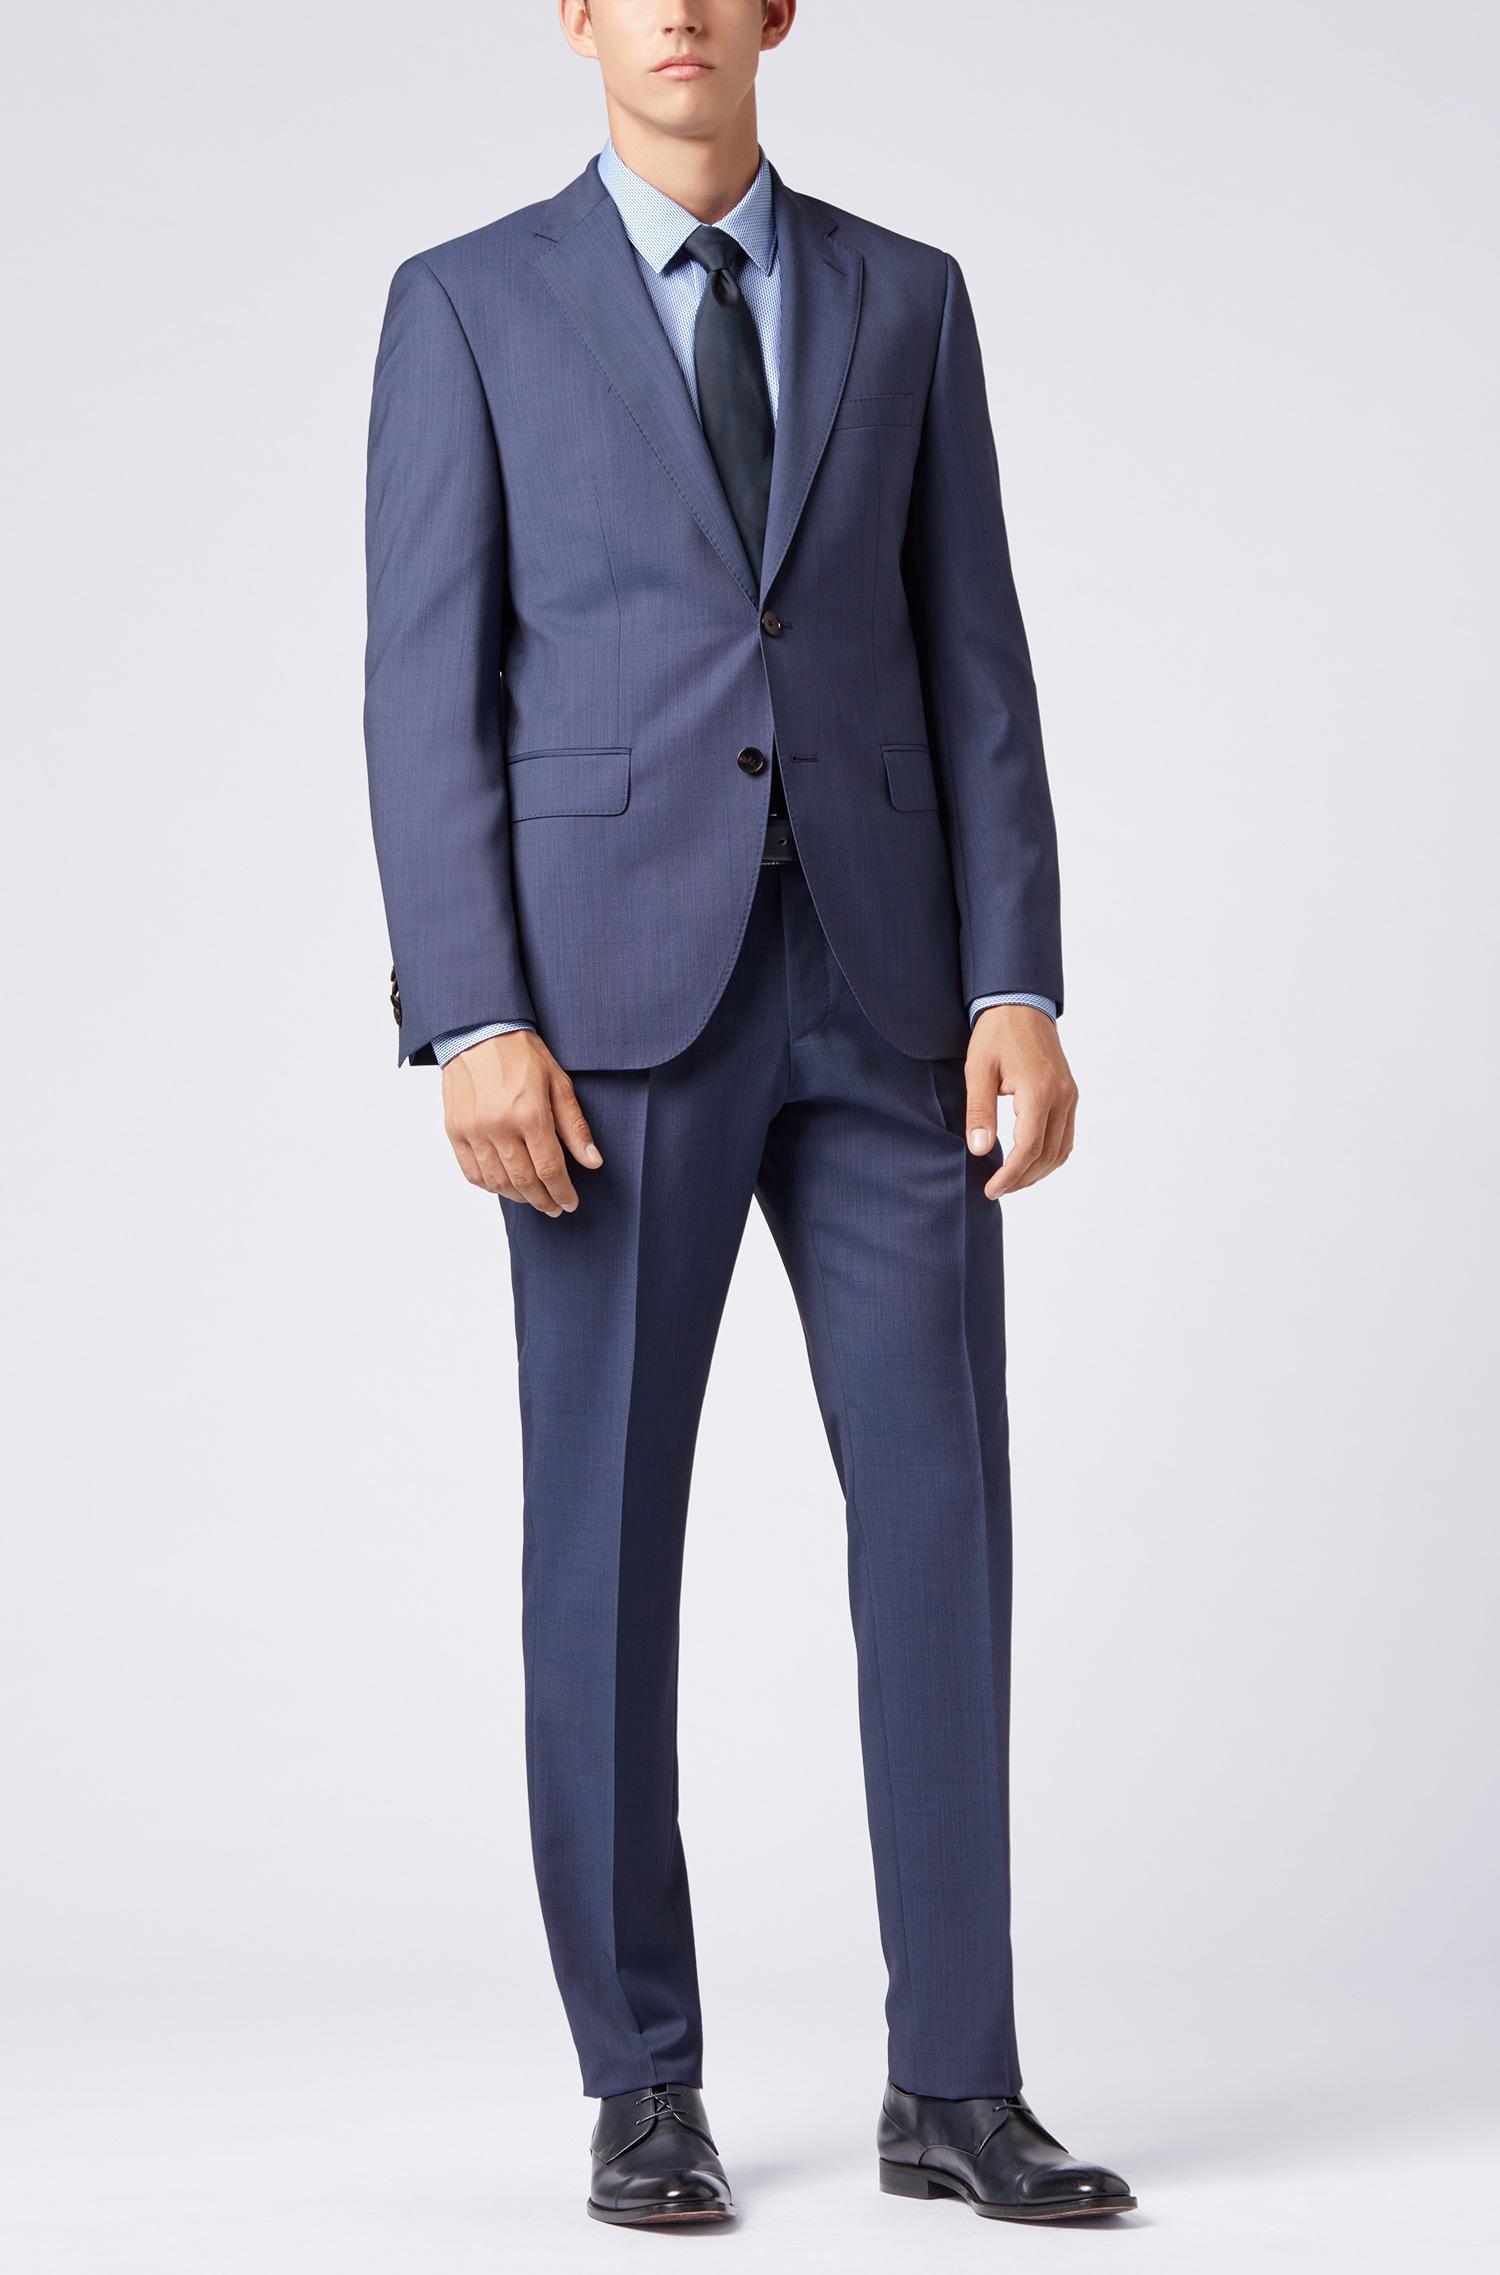 BOSS by Hugo Boss Regular-fit Suit In Structured Marzotto Wool in Dark Blue  (Blue) for Men - Lyst